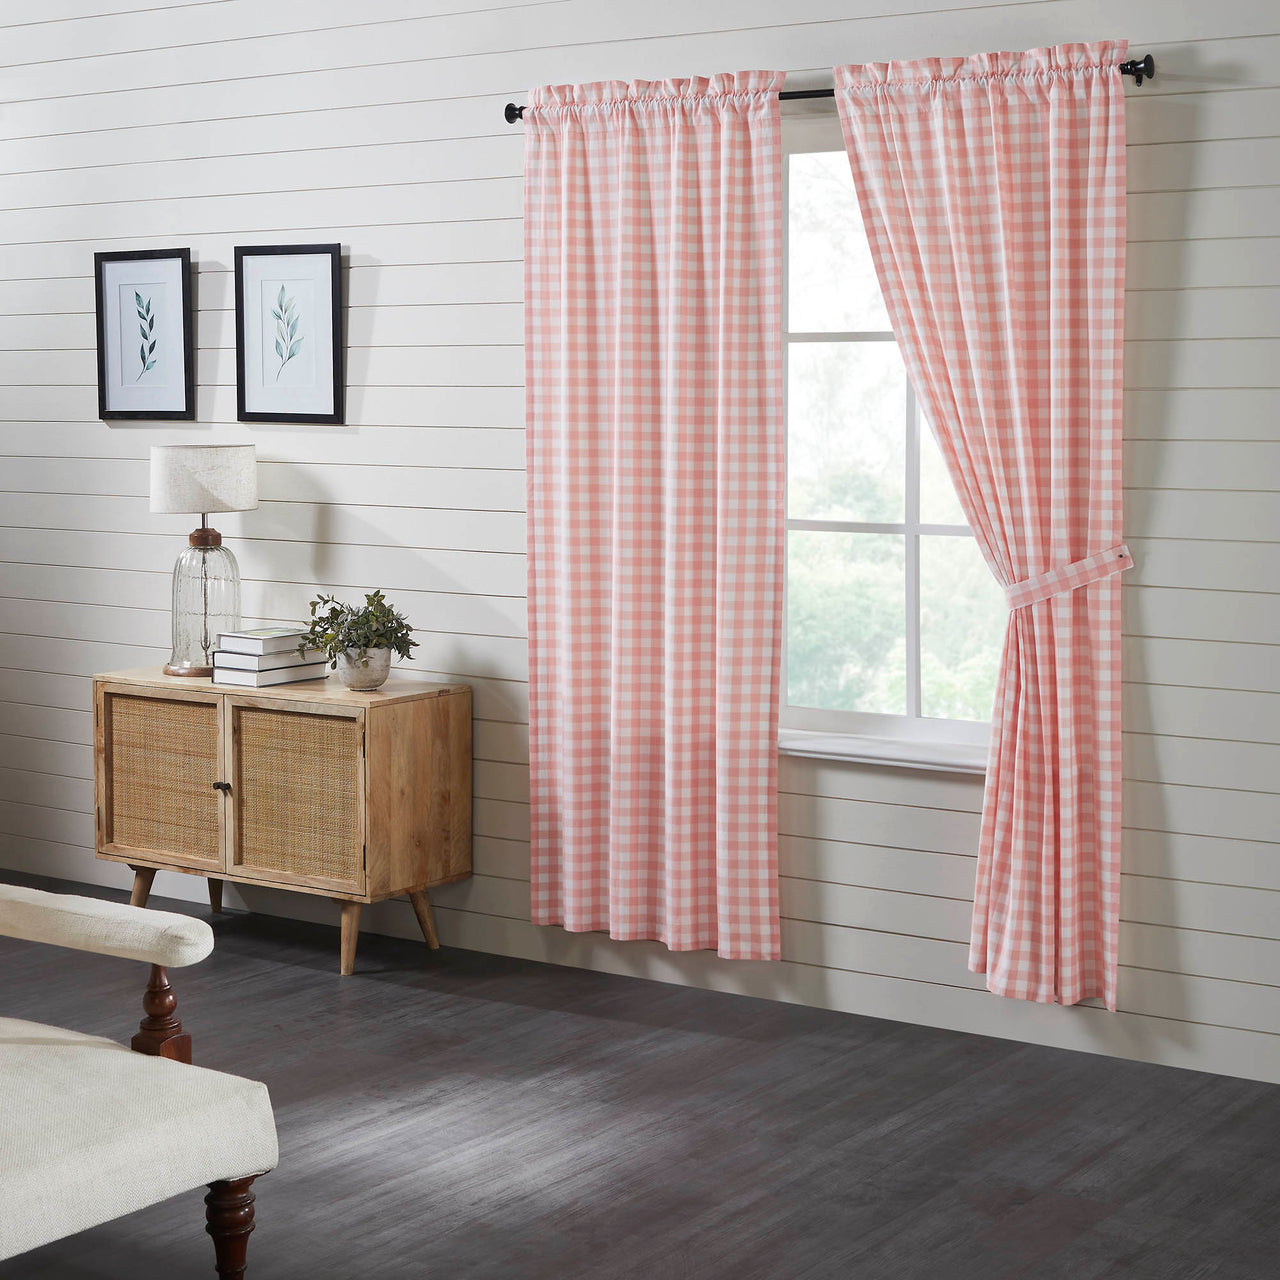 Annie Buffalo Coral Check Short Panel Curtain Set of 2 84"x40" VHC Brands